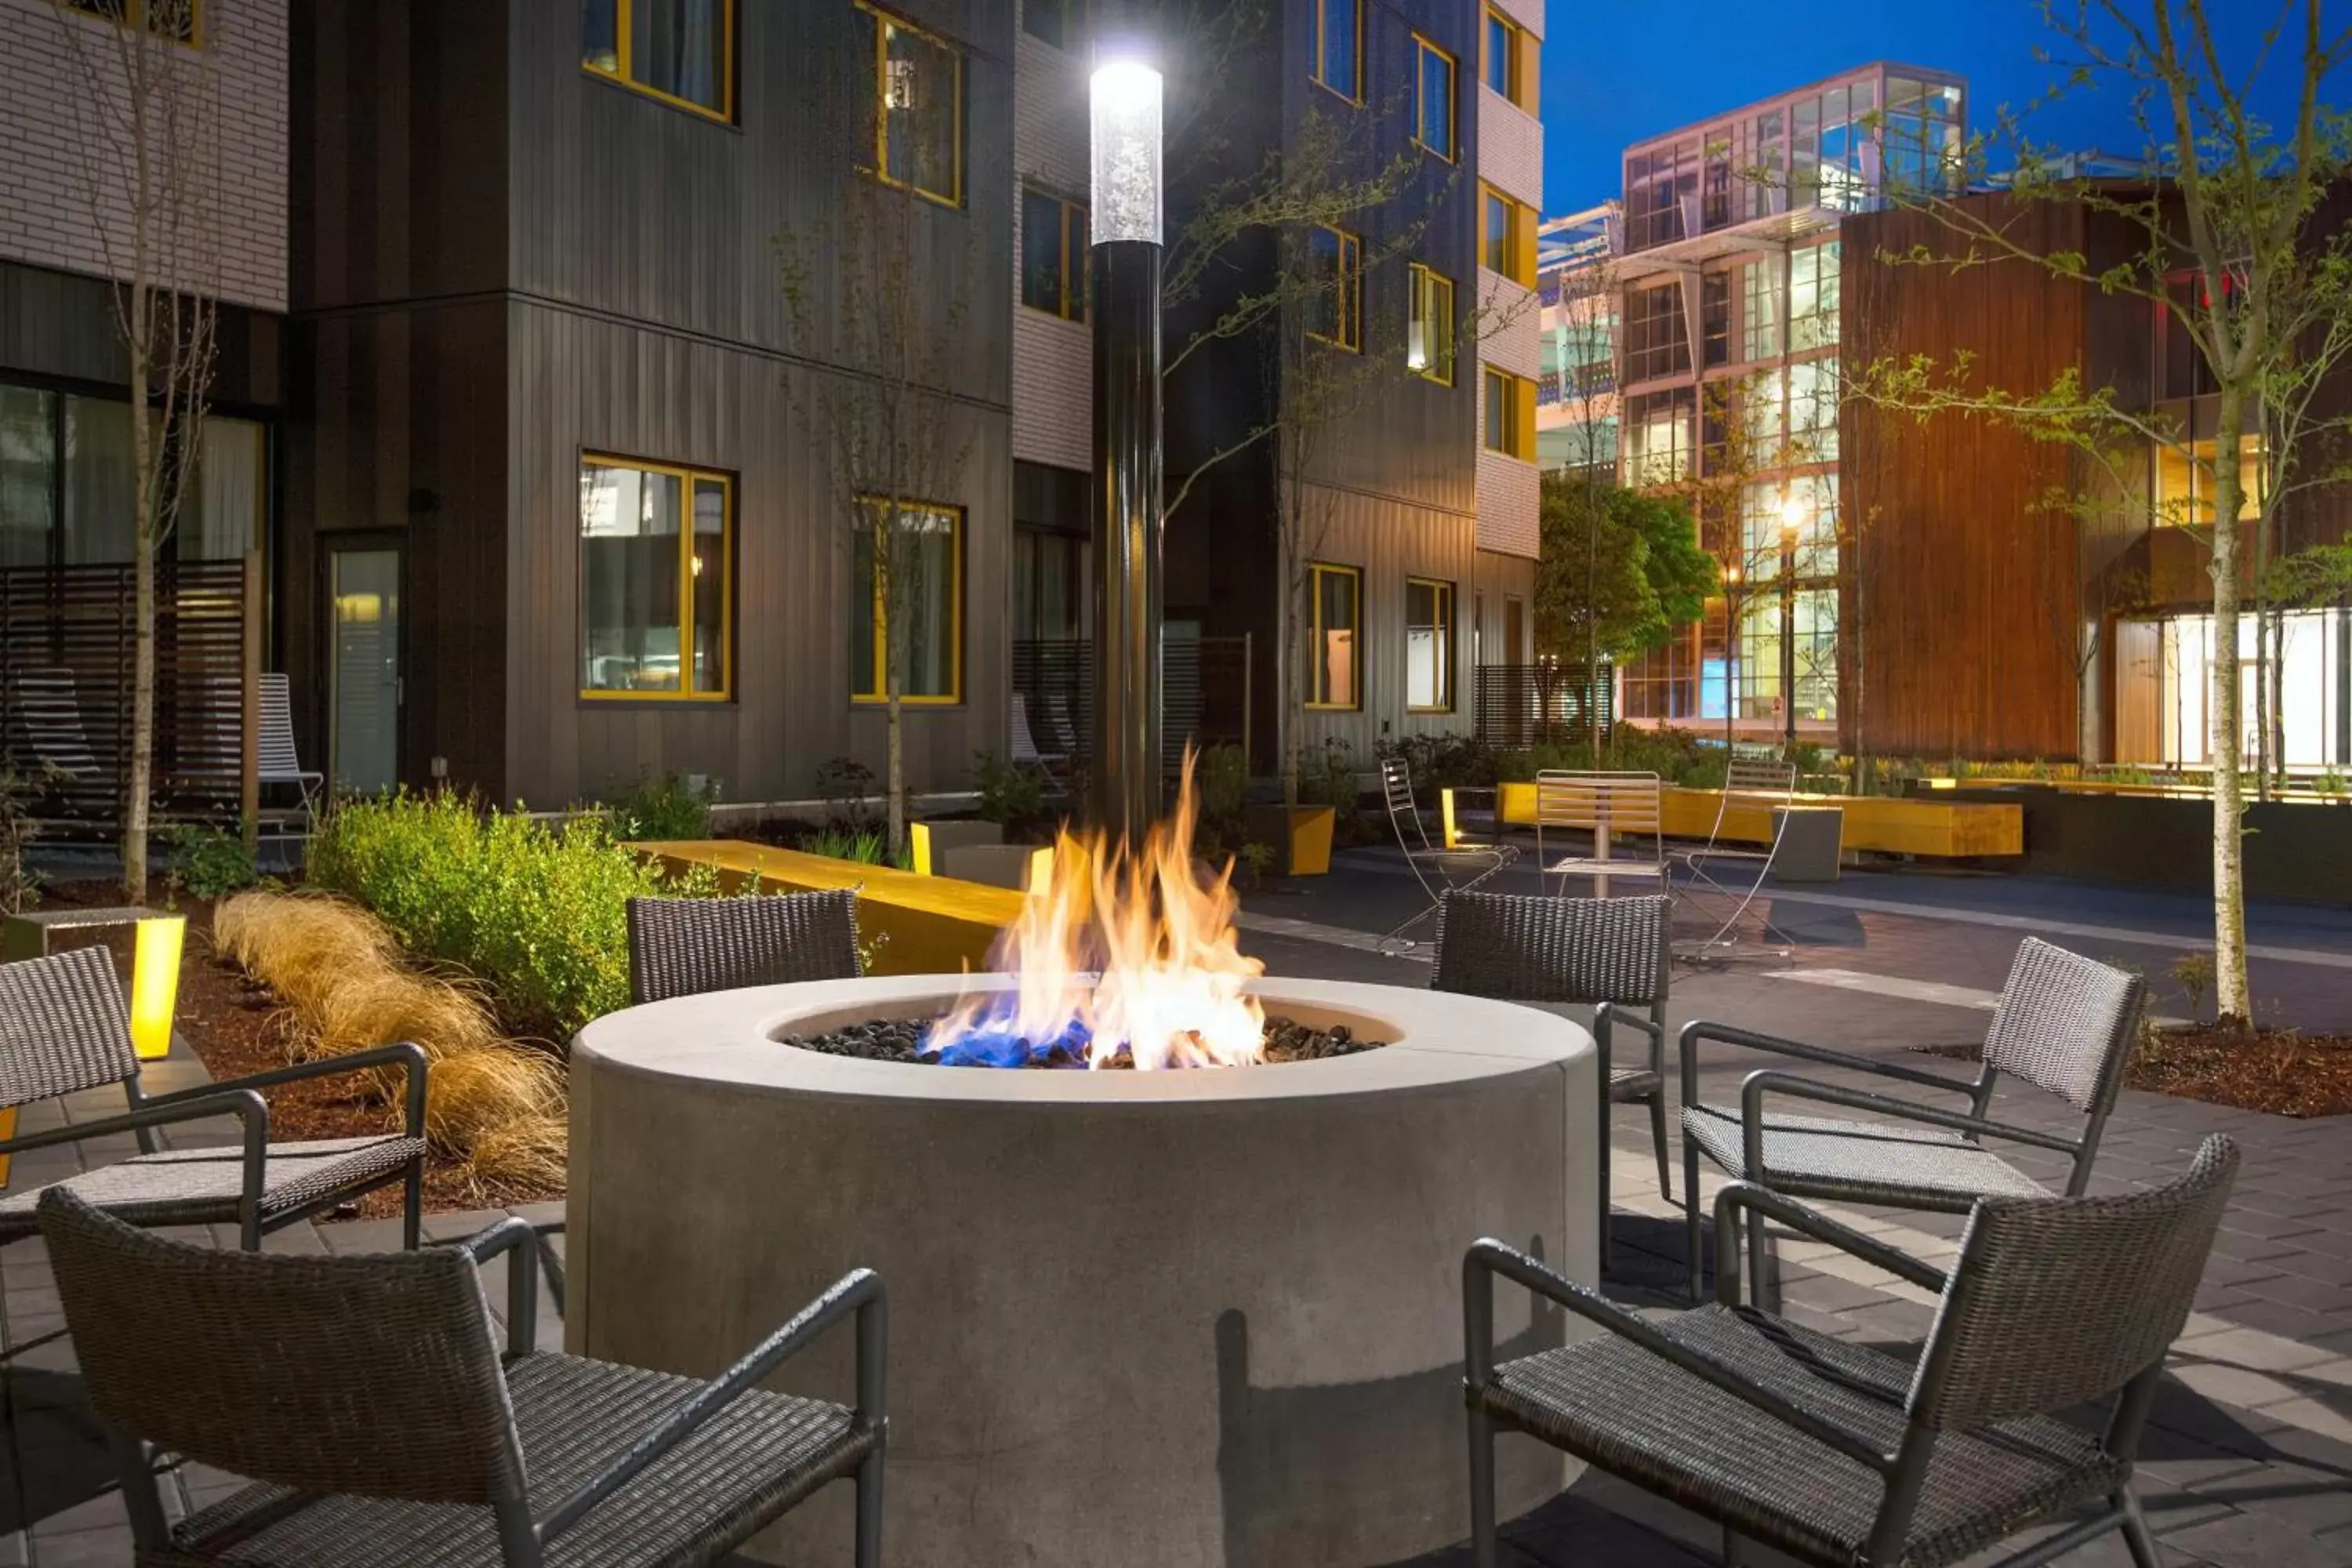 Property building in Residence Inn by Marriott Portland Downtown/Pearl District